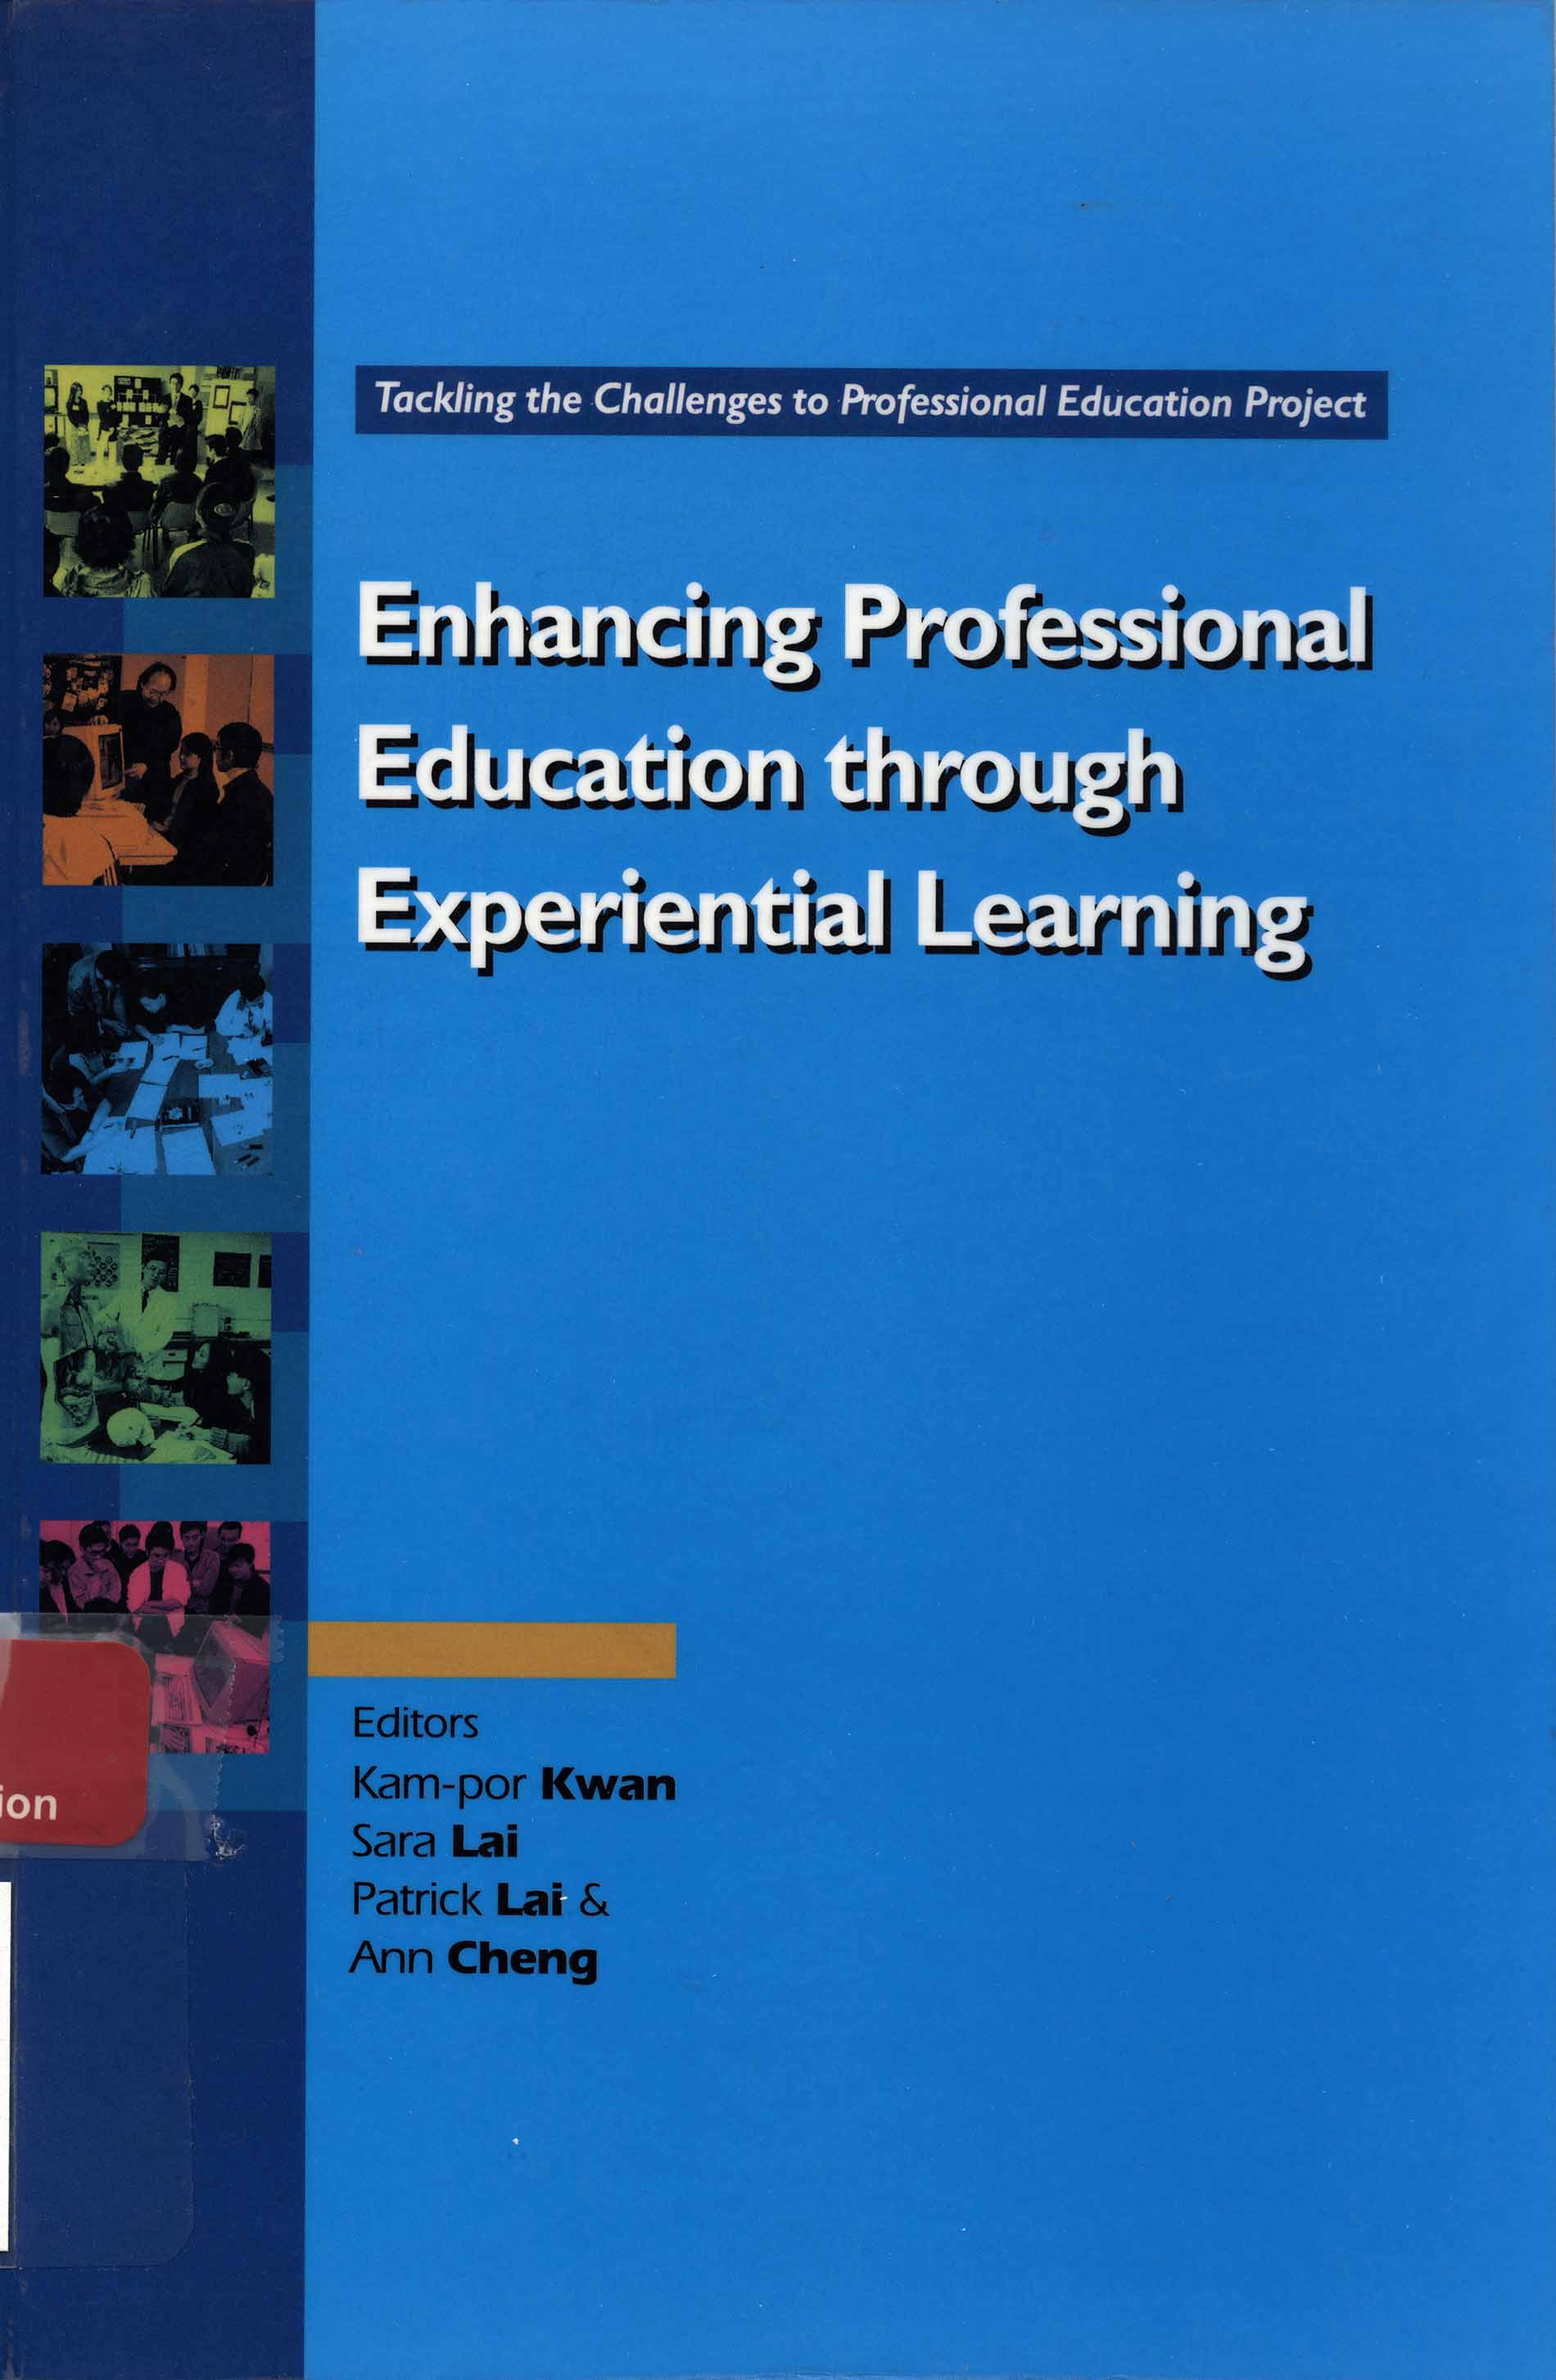 Enhancing professional education through experiential learning